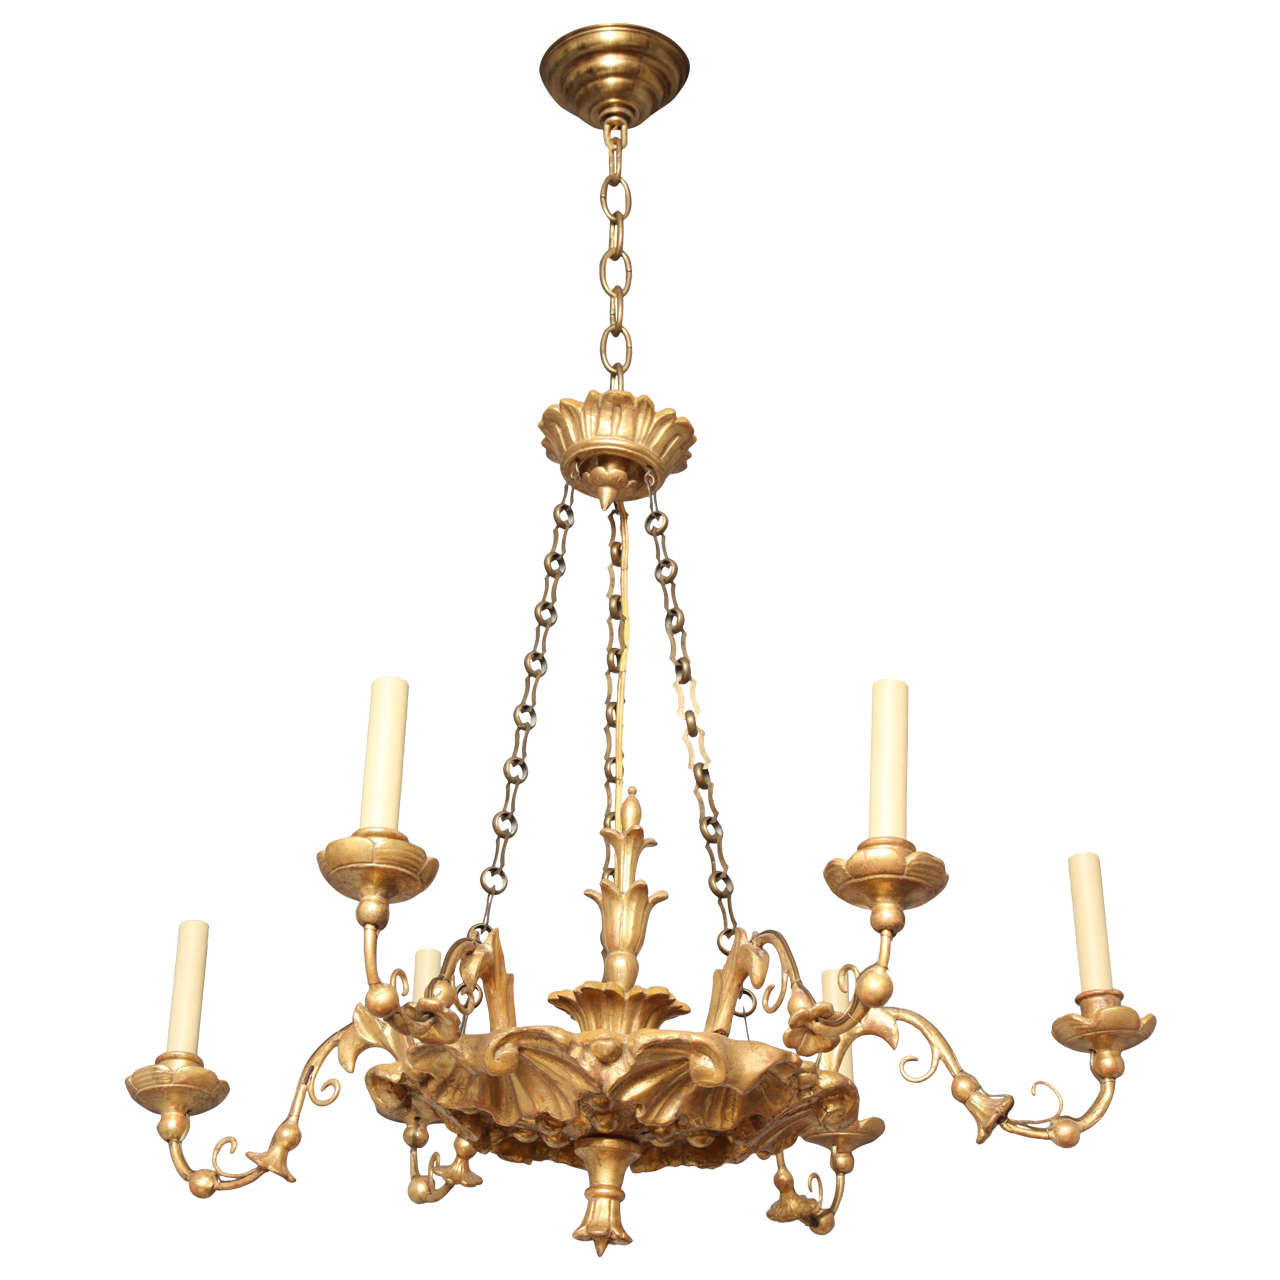 A 6 Light Austrian Carved and Gilt Wood Chandelier